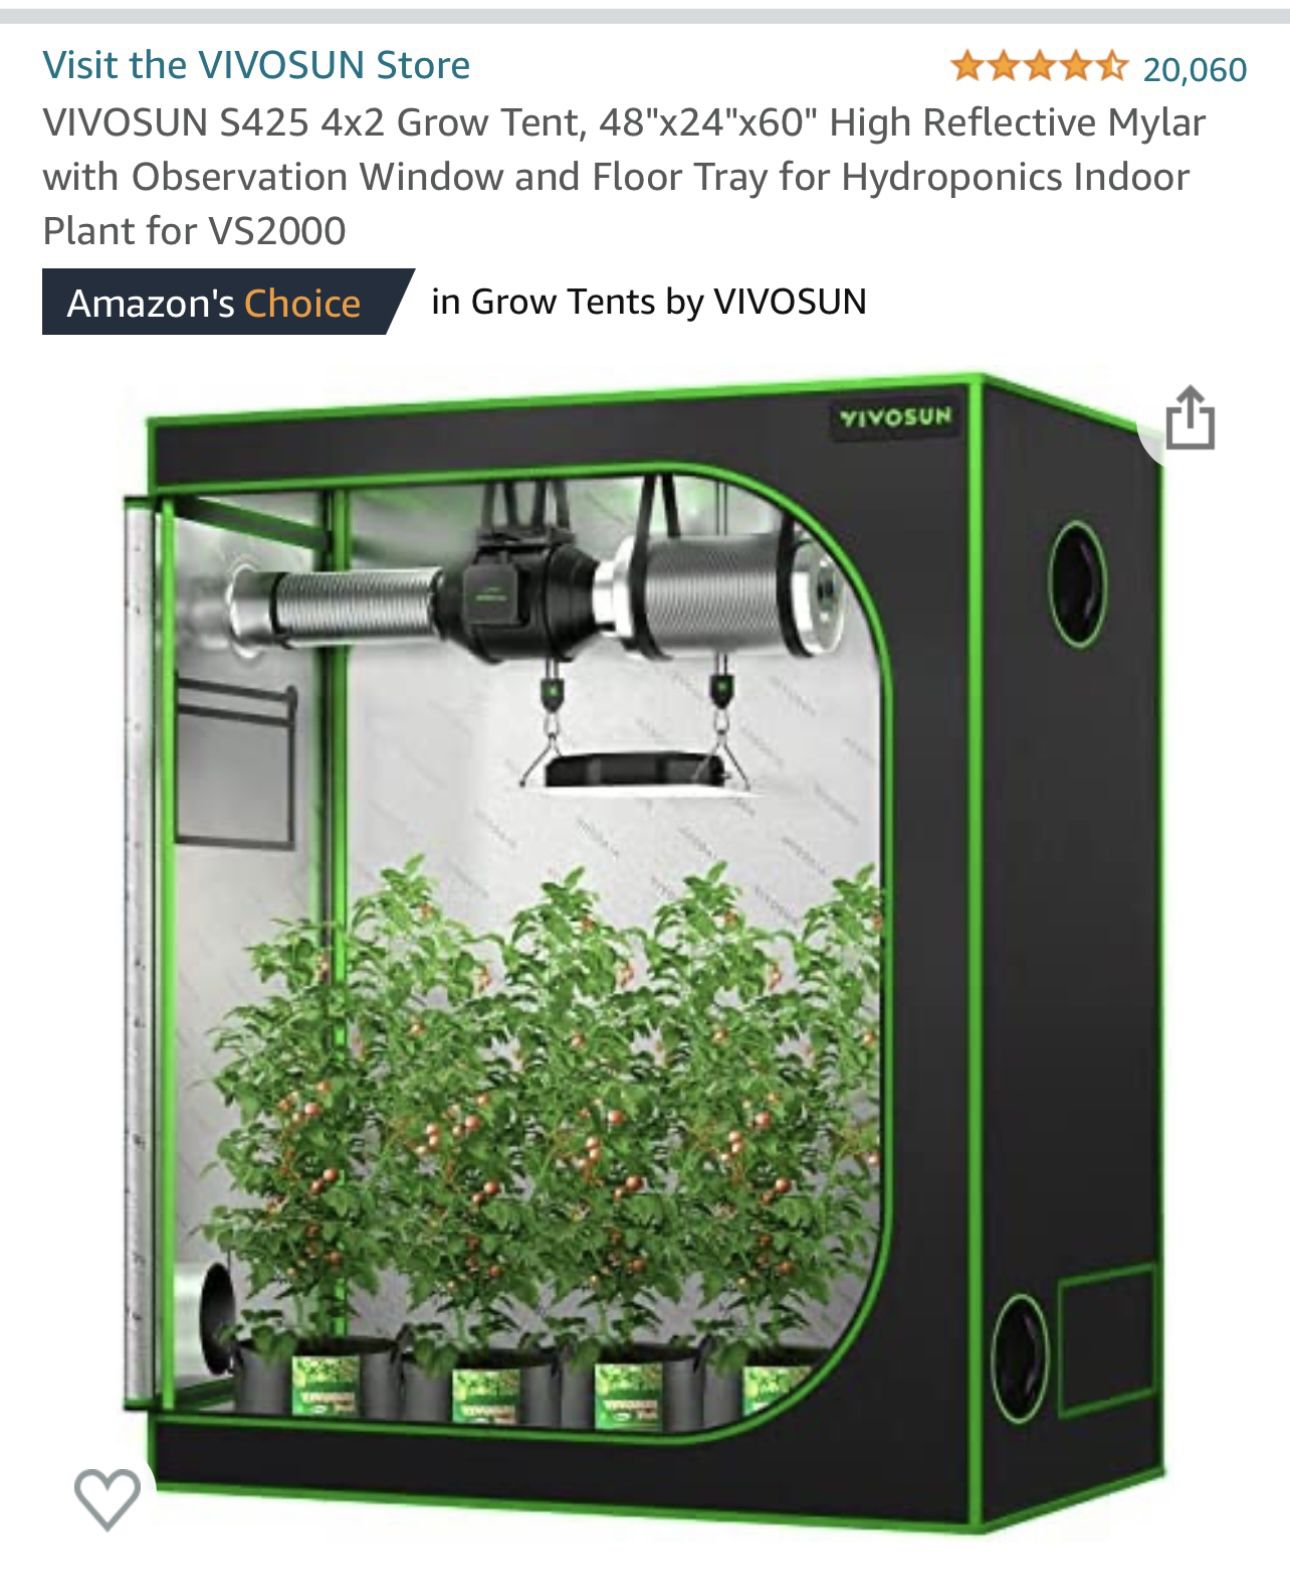 VIVOSUN 4x2 Grow Tent, 48"x24"×60" High Reflective Mylar with Observation Window and Floor Tray for Hydroponics Indoor Plant